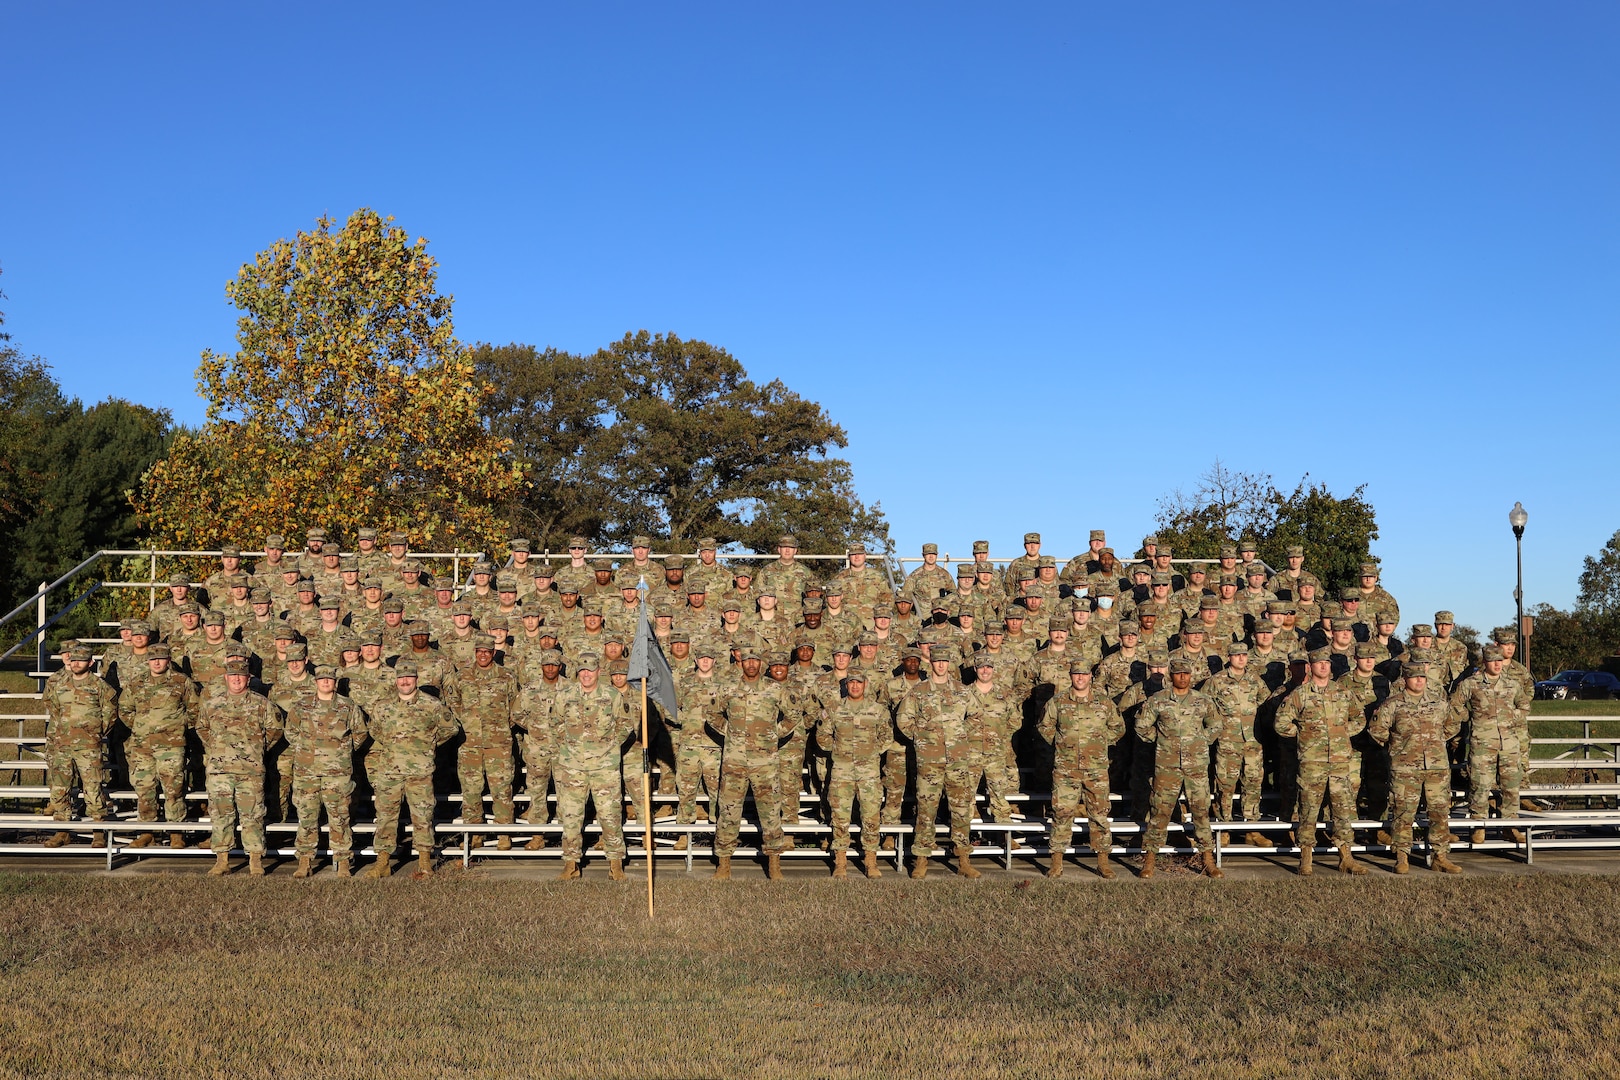 Army National Guard Soldiers of the 123rd Cyber Protection Battalion, 91st Cyber Brigade, completed their support of the Task Force Echo V mission and returned to their home states of Illinois, Minnesota, Virginia and Wisconsin after a transition of authority ceremony Dec. 1, 2021, at Fort George G. Meade, Maryland.